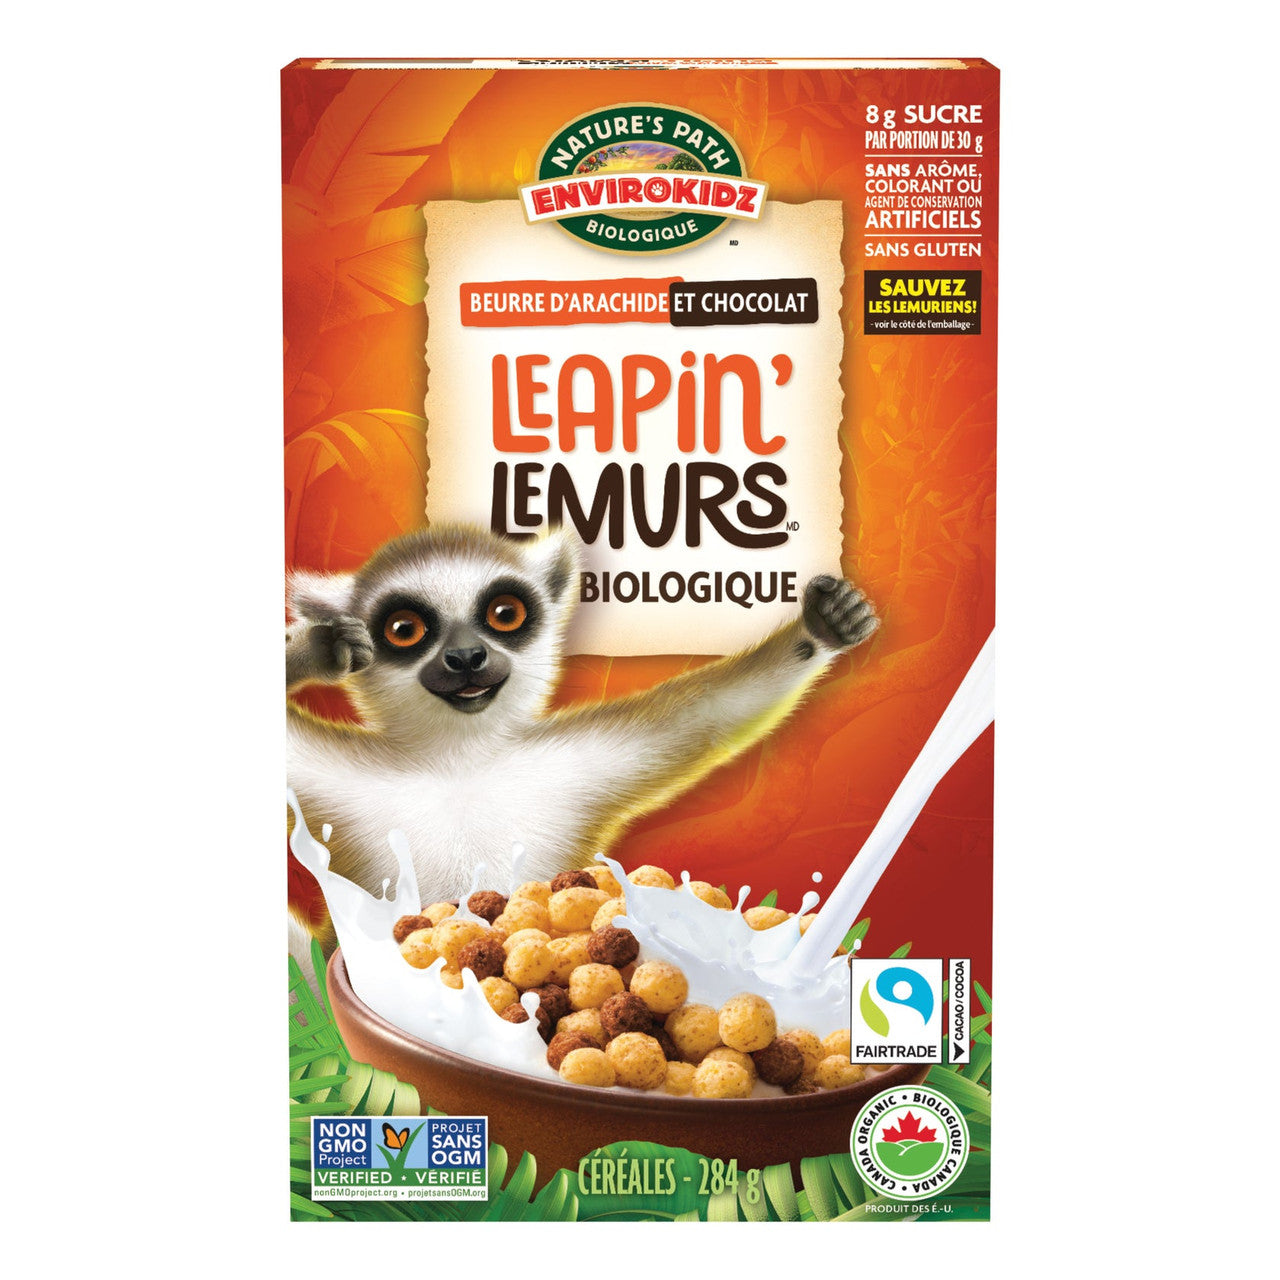 Nature's Path EnviroKidz Organic Leapin' Lemurs Peanut Butter Chocolate Cereal, 284g/10 oz. Box {Imported from Canada}